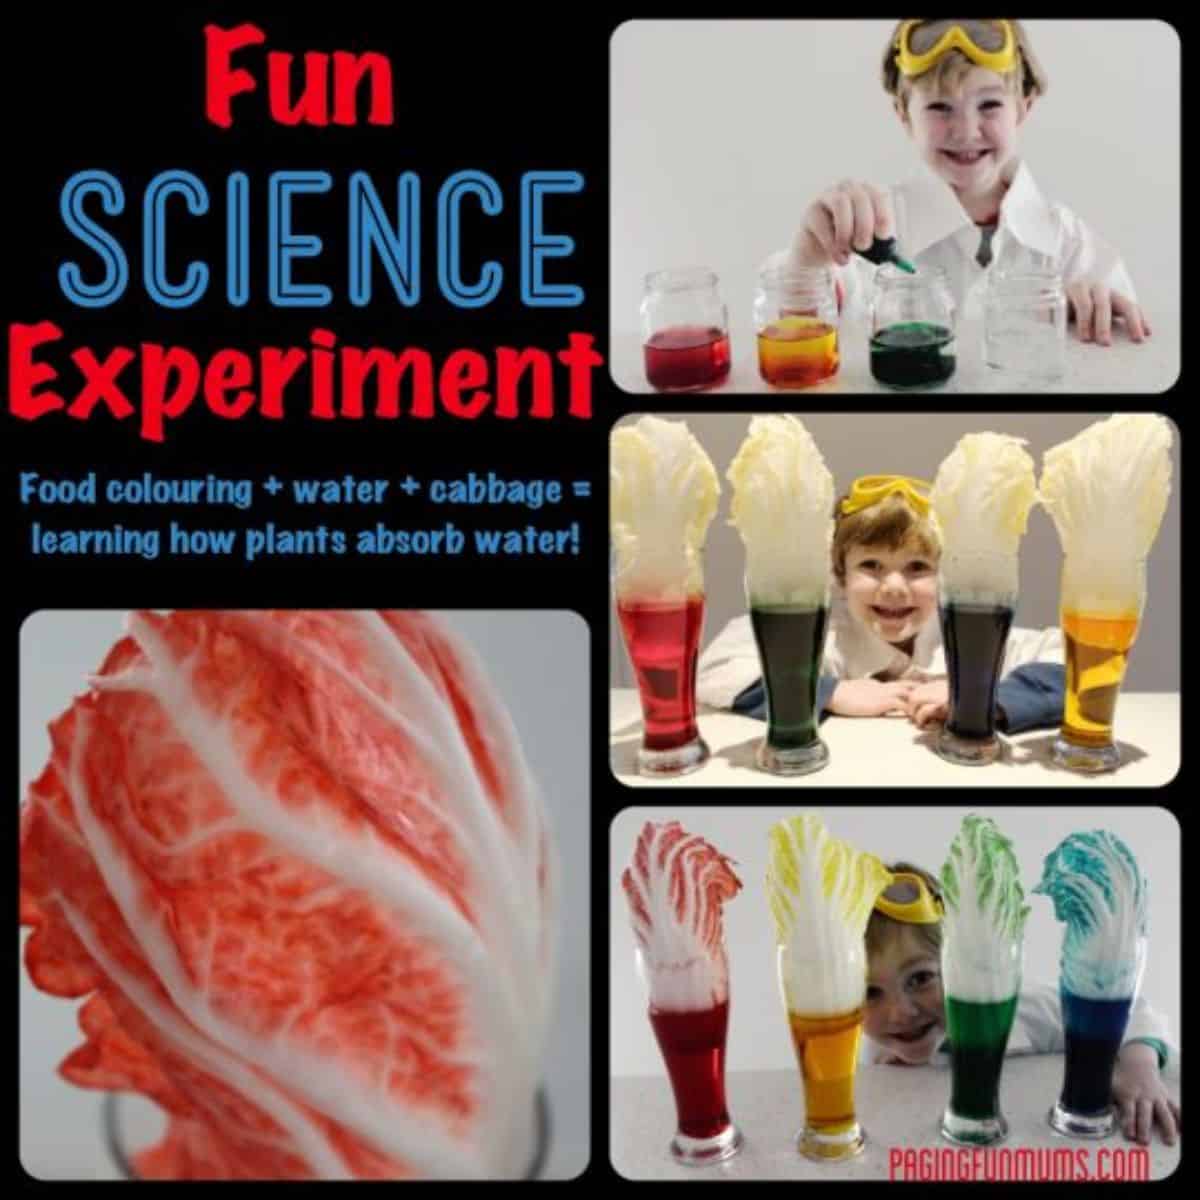 Multiple miages of fun science experiment.